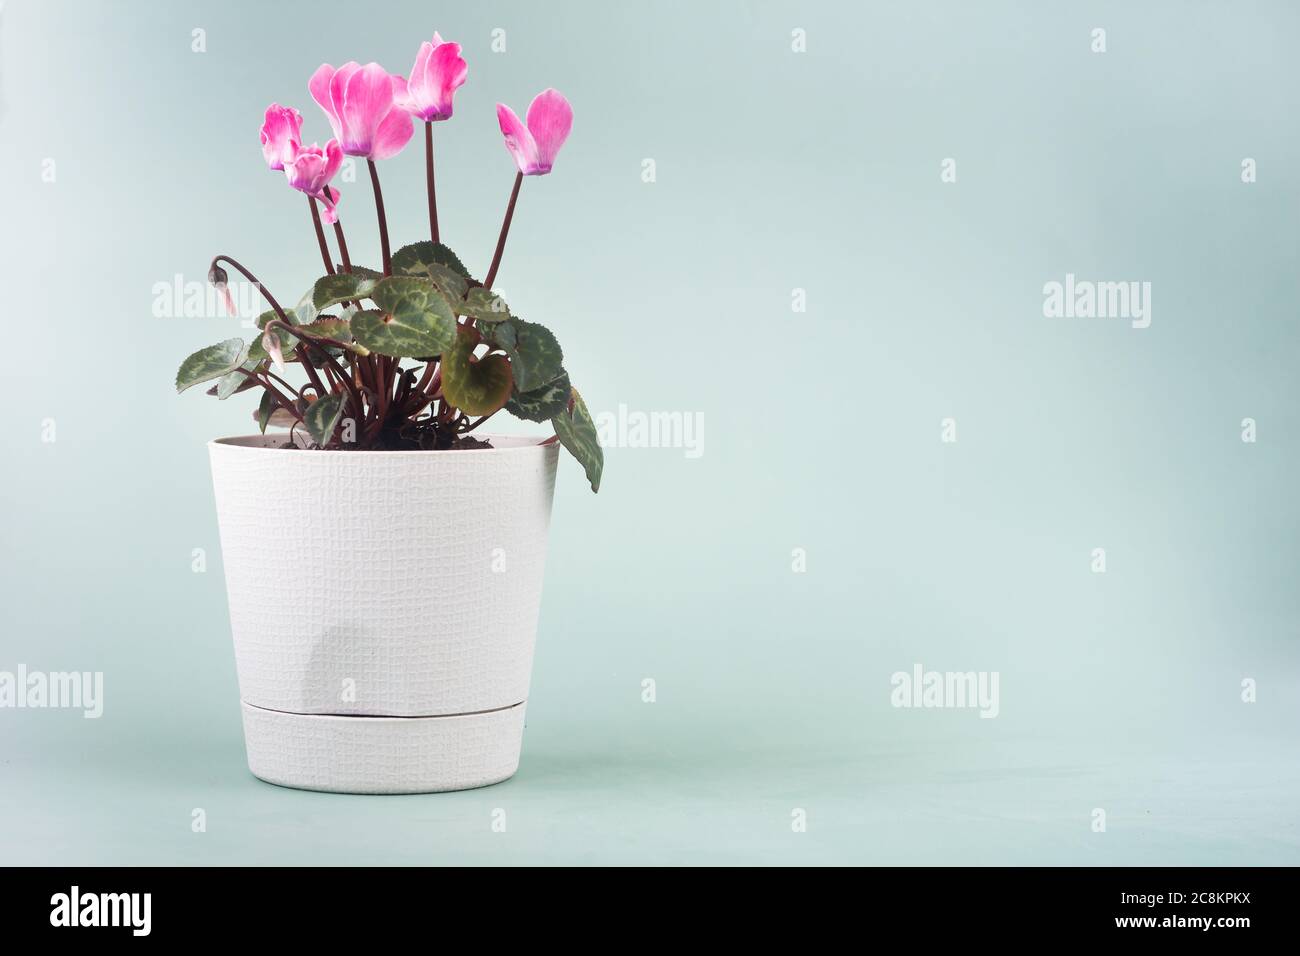 cyclamen flower in a White pot on a gray-green background Stock Photo